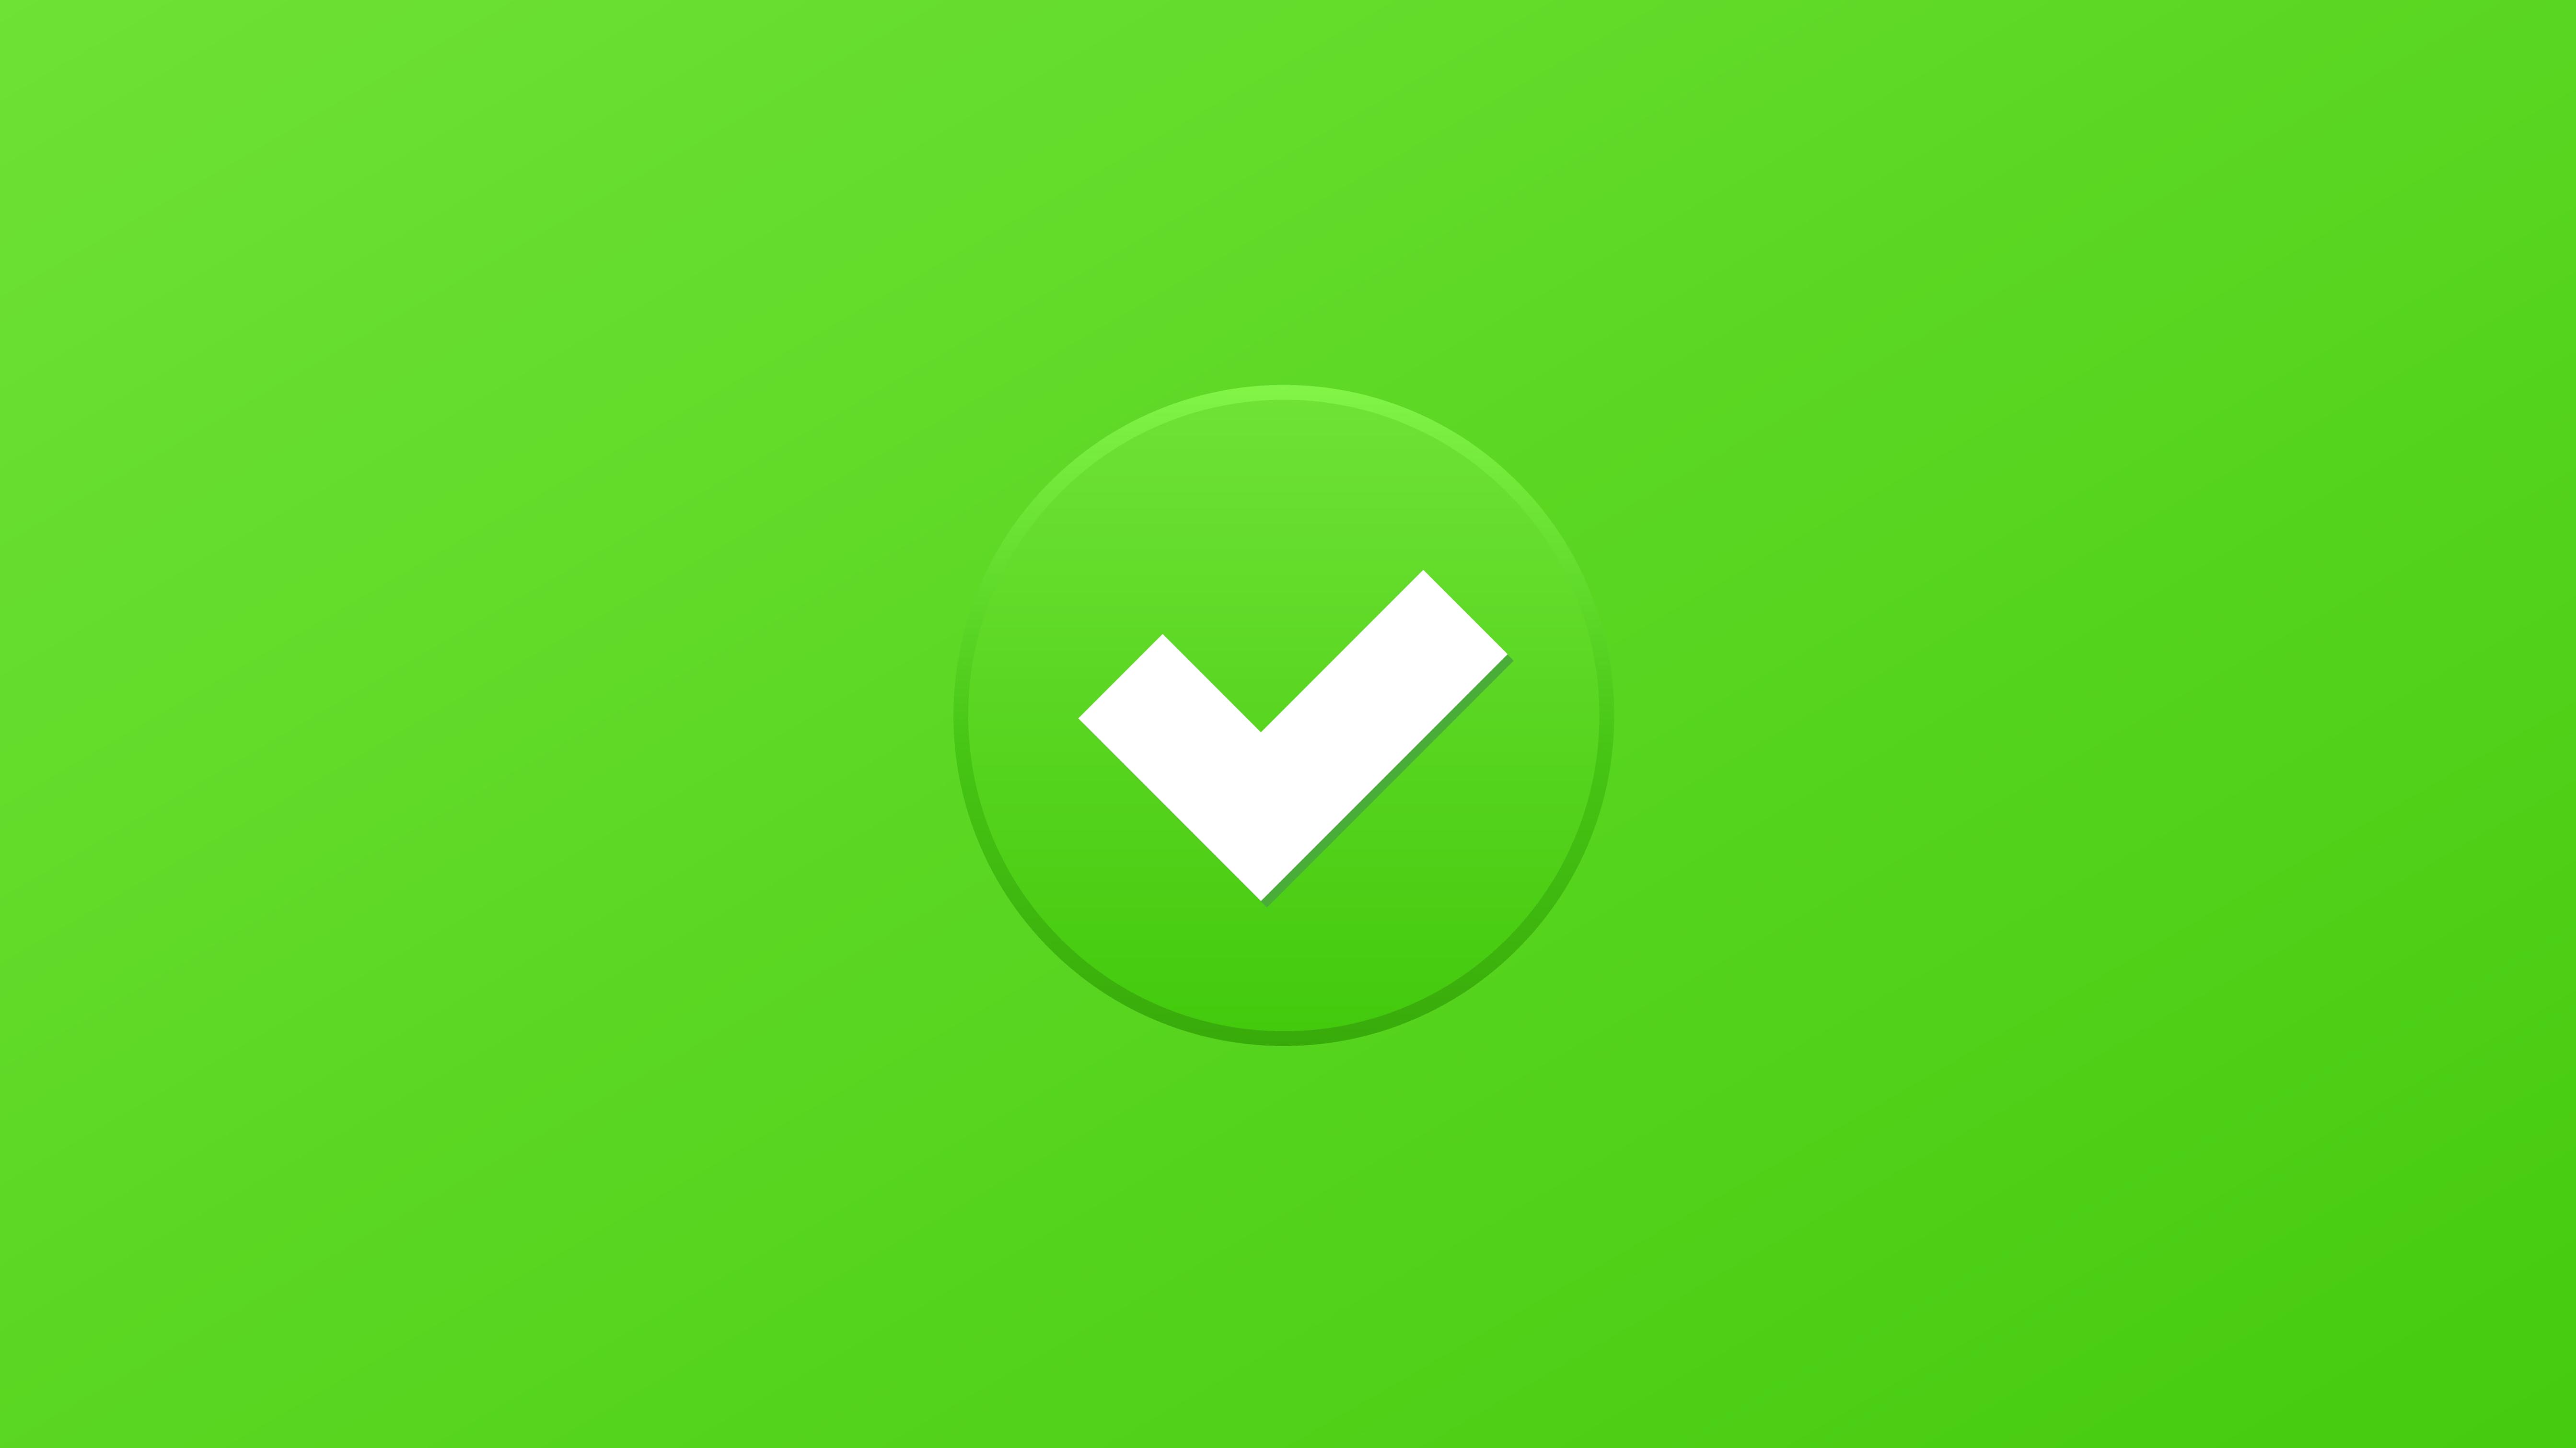 The green tick badge indicates to customers that your business is genuine and trustworthy